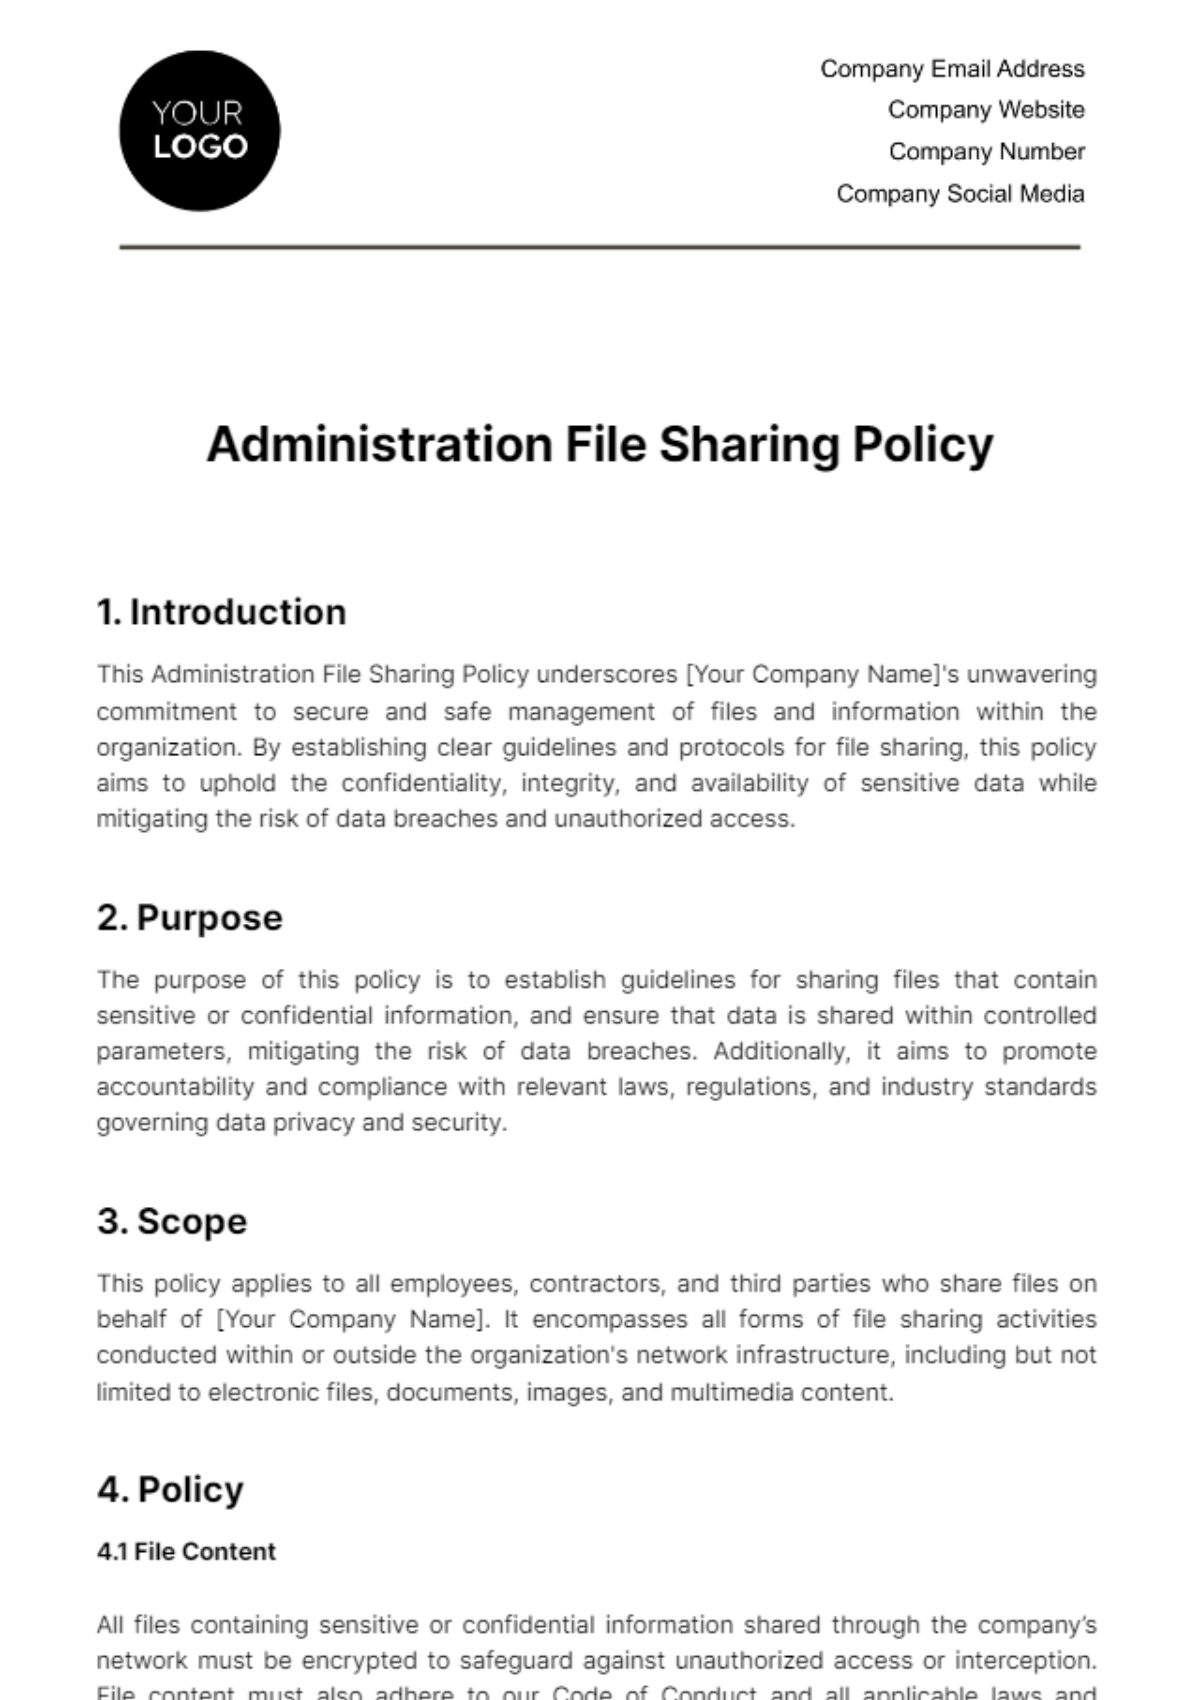 Administration File Sharing Policy Template